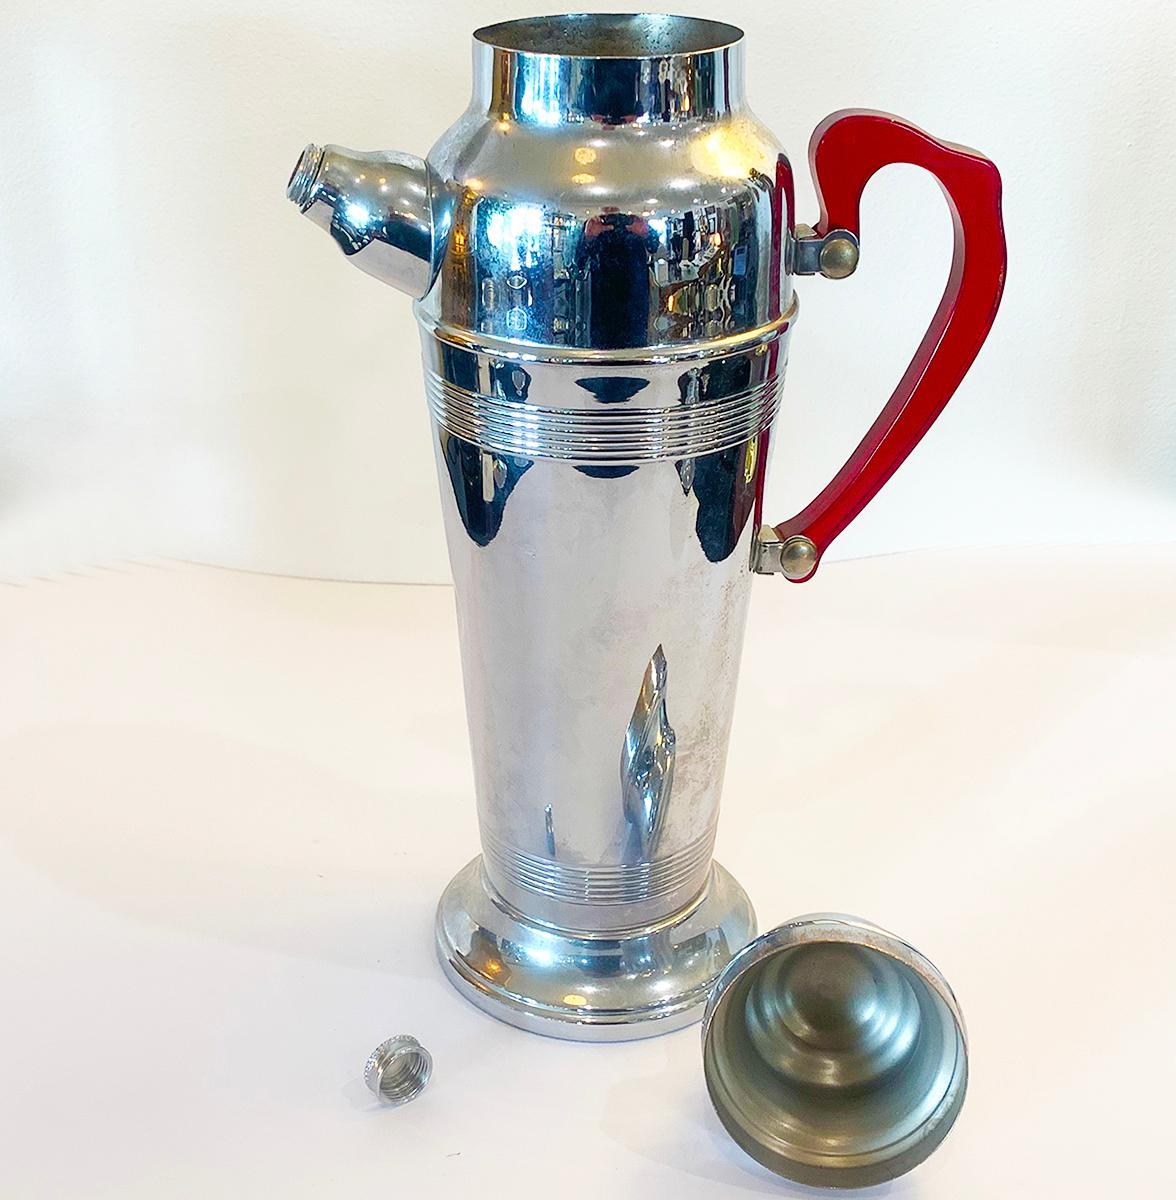 Art Deco cocktail set of lidded shaker stainless chrome as marked to base of 6 goblets and Shaker, translucent red Bakelite handle. Screw off pourer top inner strainer for pips or ice cubes, Stainless chrome base, cap chromed copper to tight fit